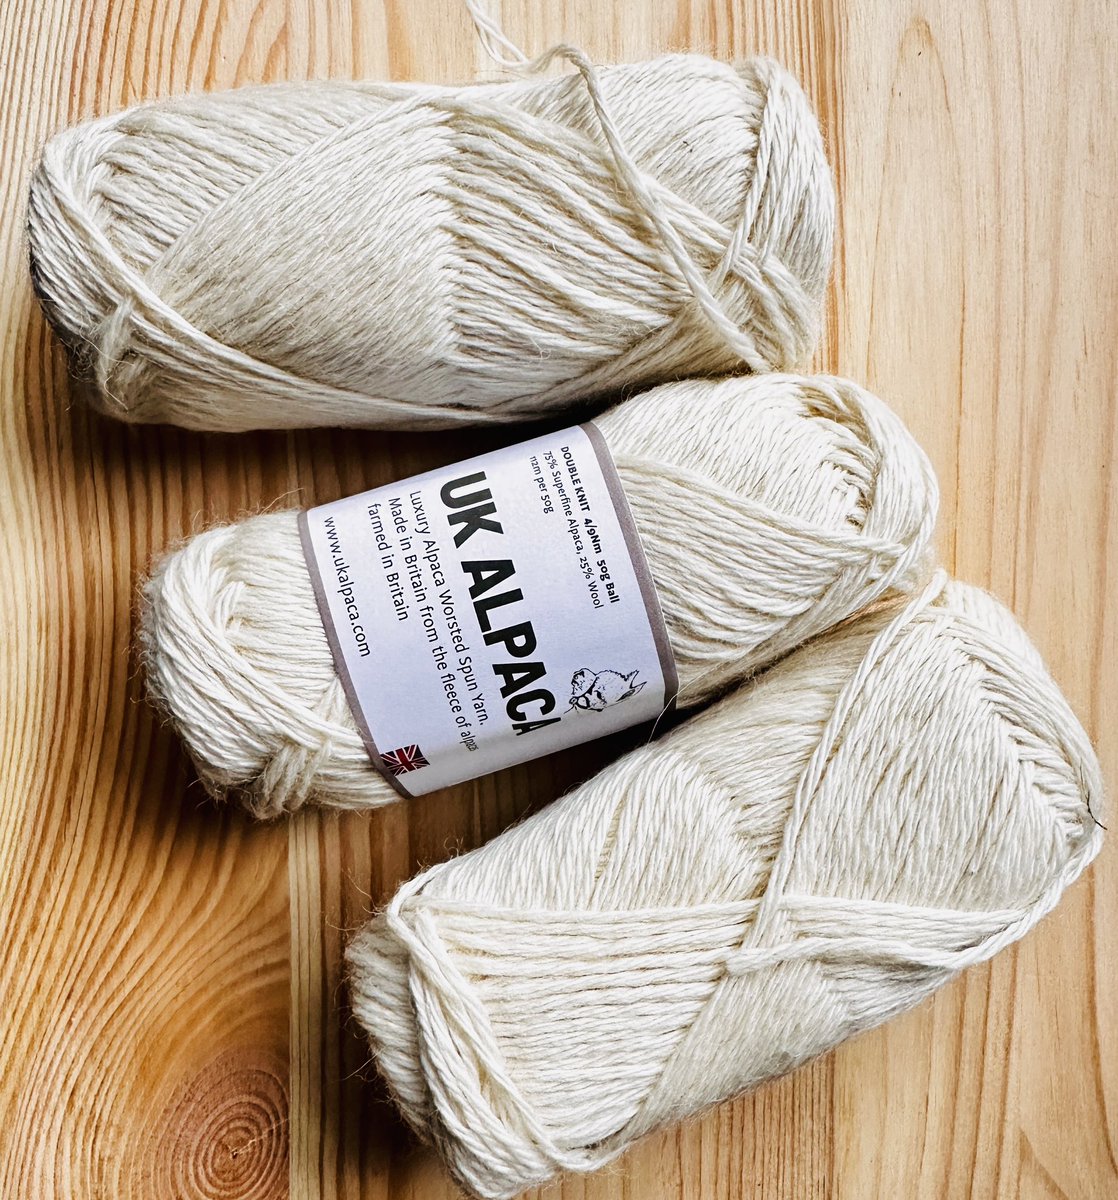 You can choose from various weights of wool when you order from me, including UK Alpaca.

The different weights give varying thickness of fabric, so there’s one for every season & individual.

#britishwool #handwoventextiles #mhhsbd #artisanmade #purefibres